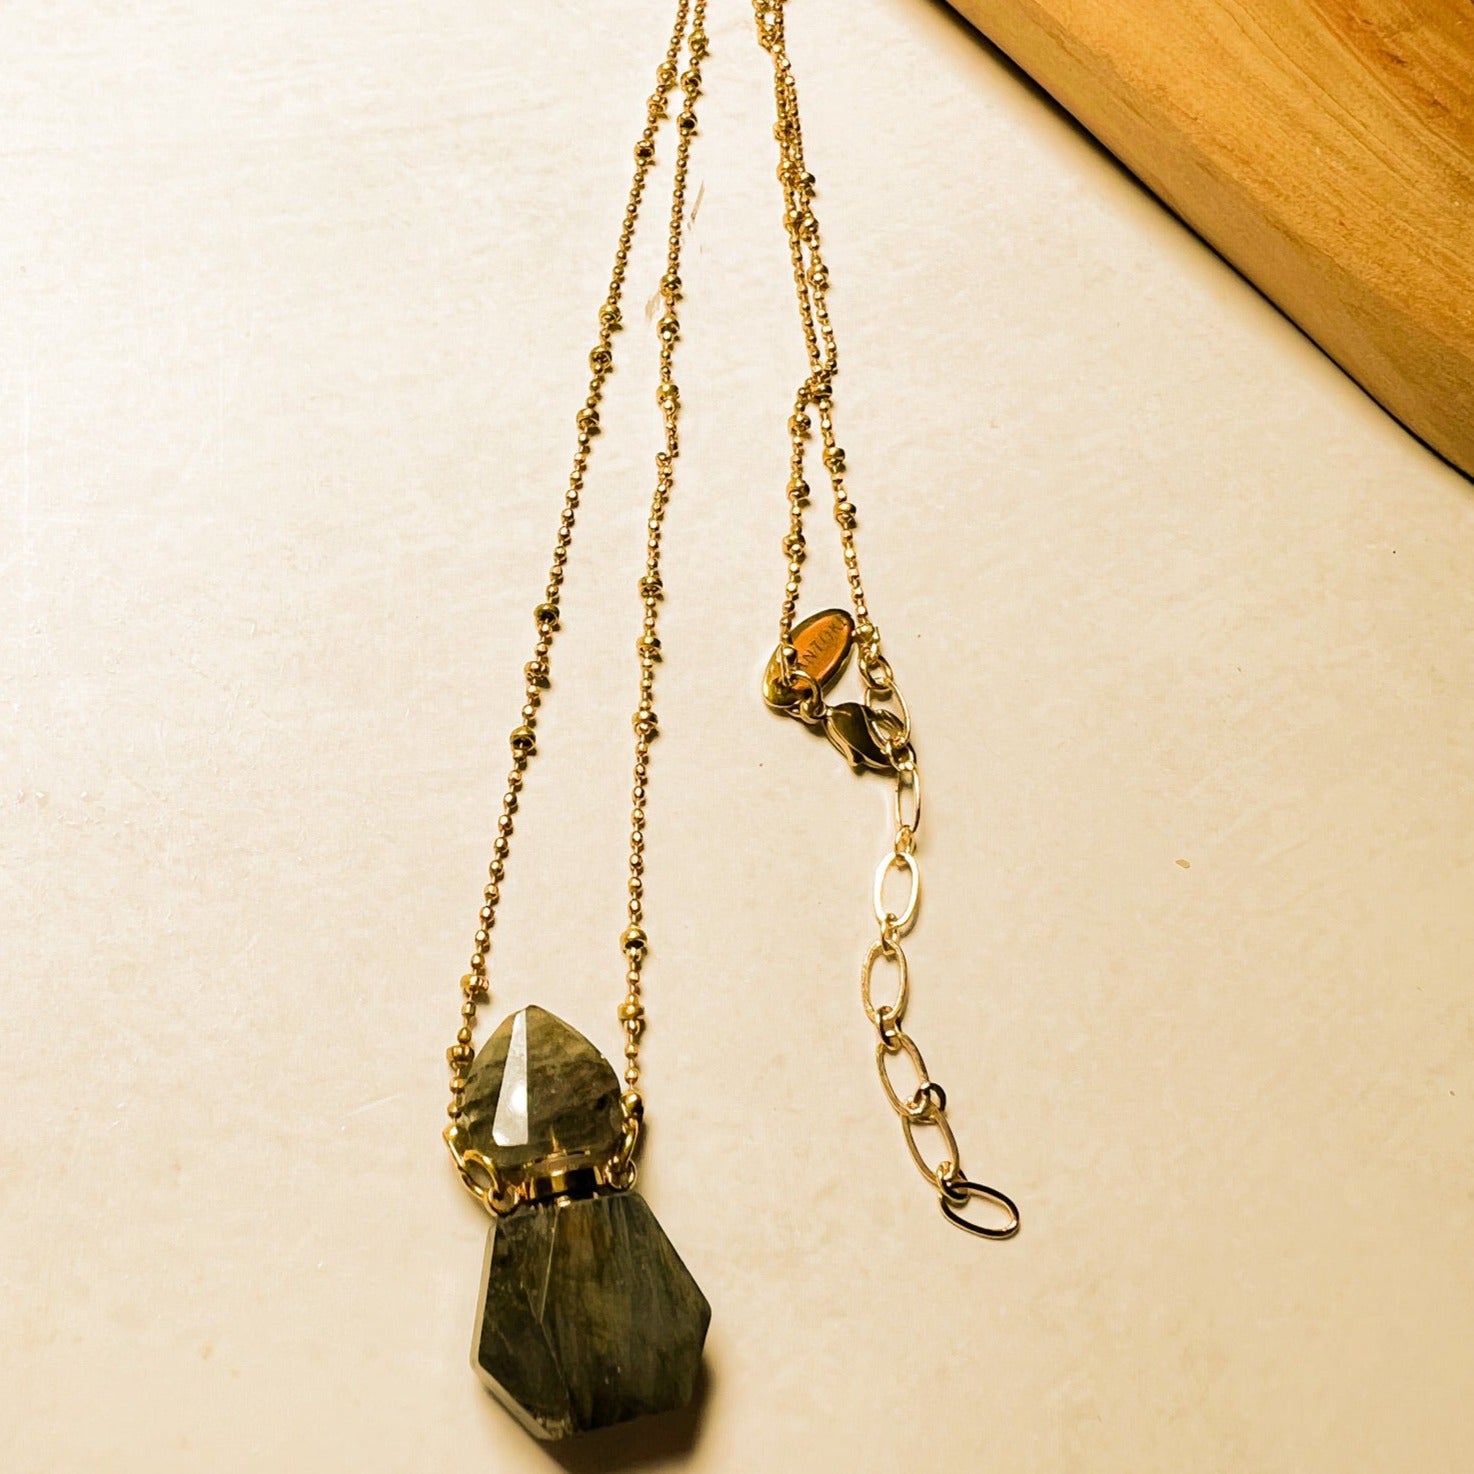 Jeanie : Small Bottle Necklace